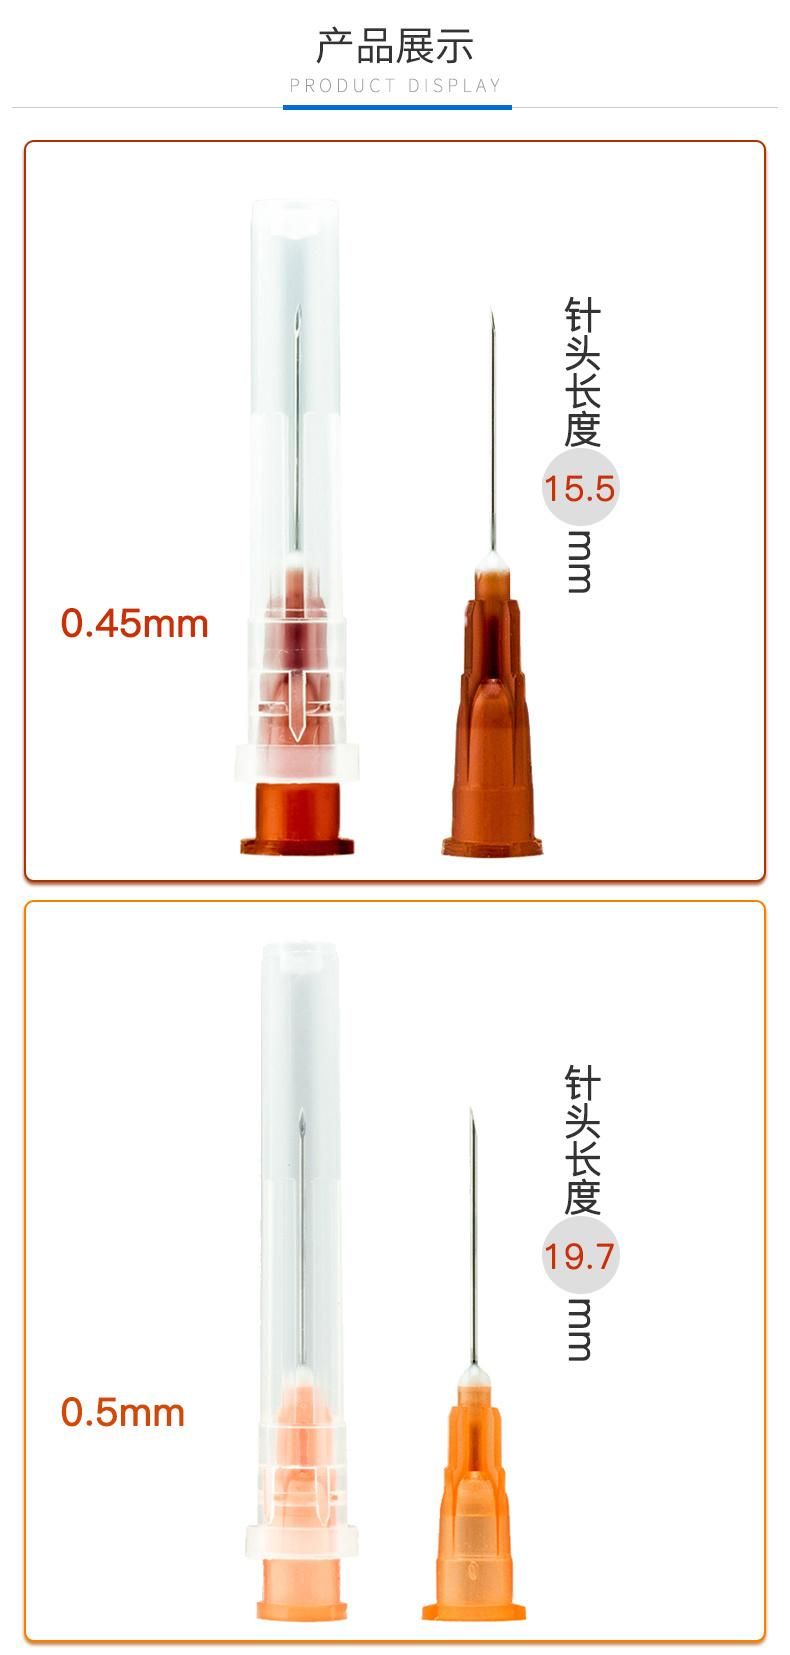 Disposable Medical Sterile Injection Needle 0.8mm*33.8mm Medical Syringe Needle Needle Device